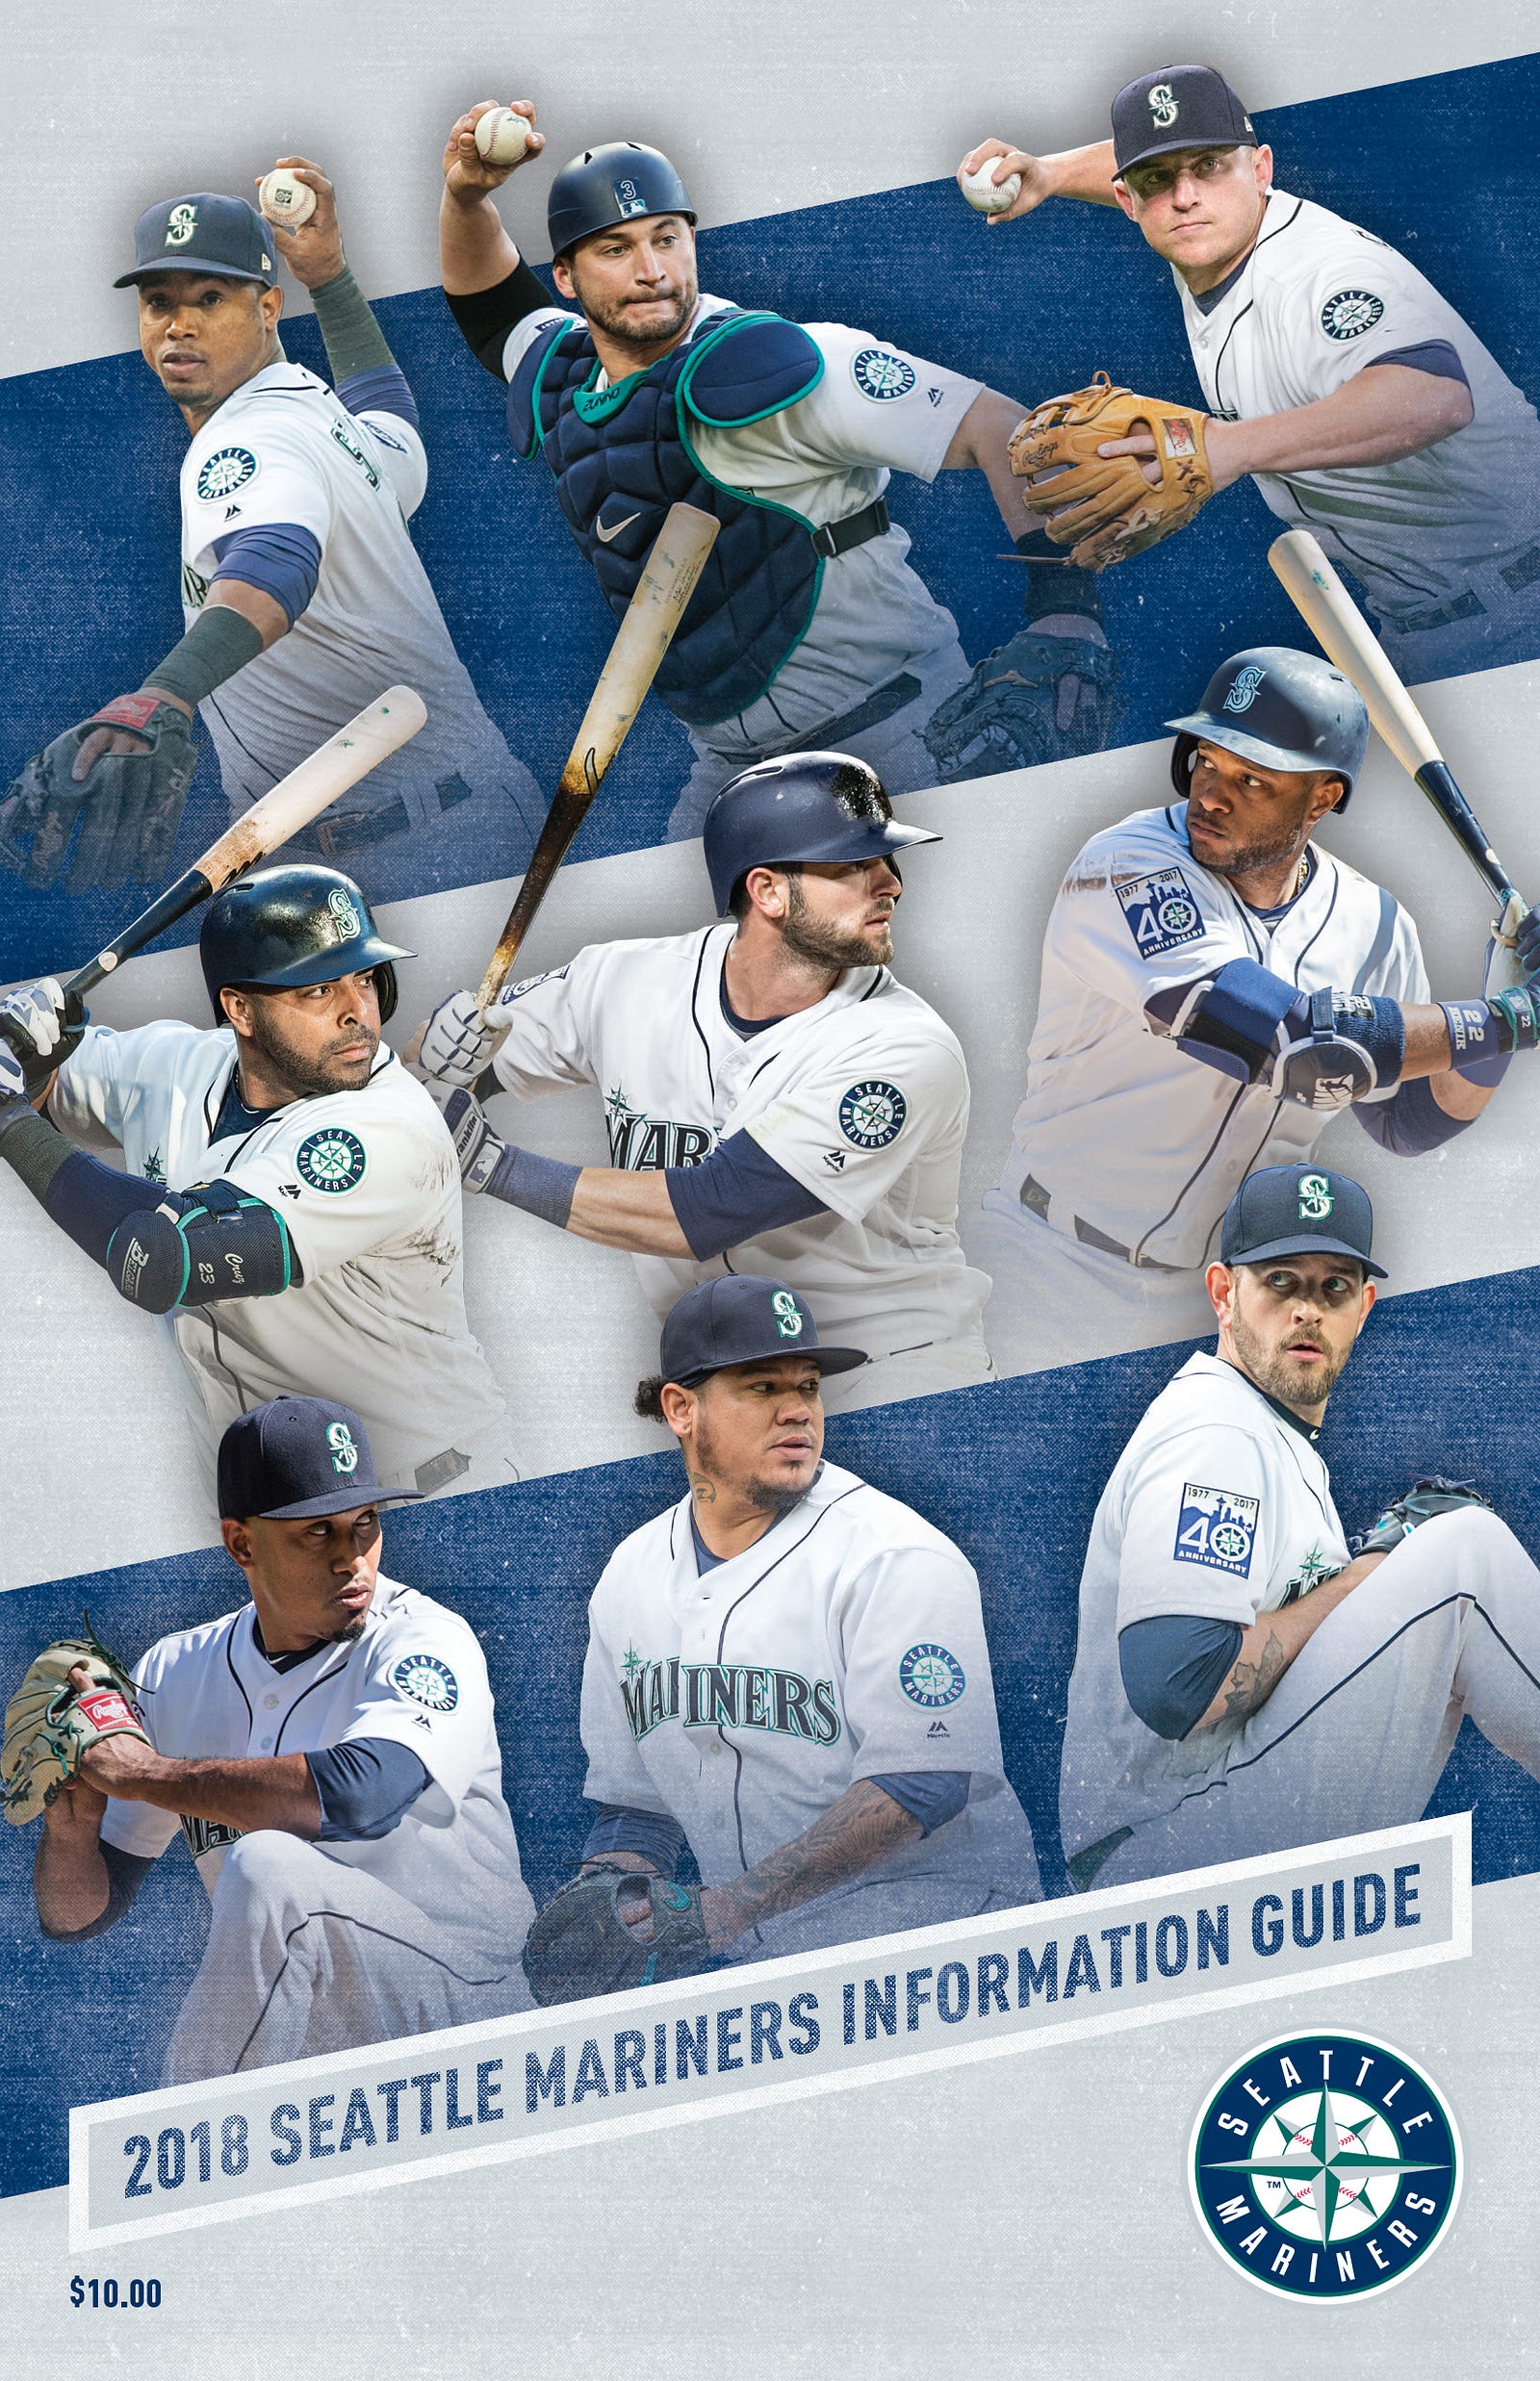 2018 Seattle Mariners Information Guide From the Corner of Edgar & Dave